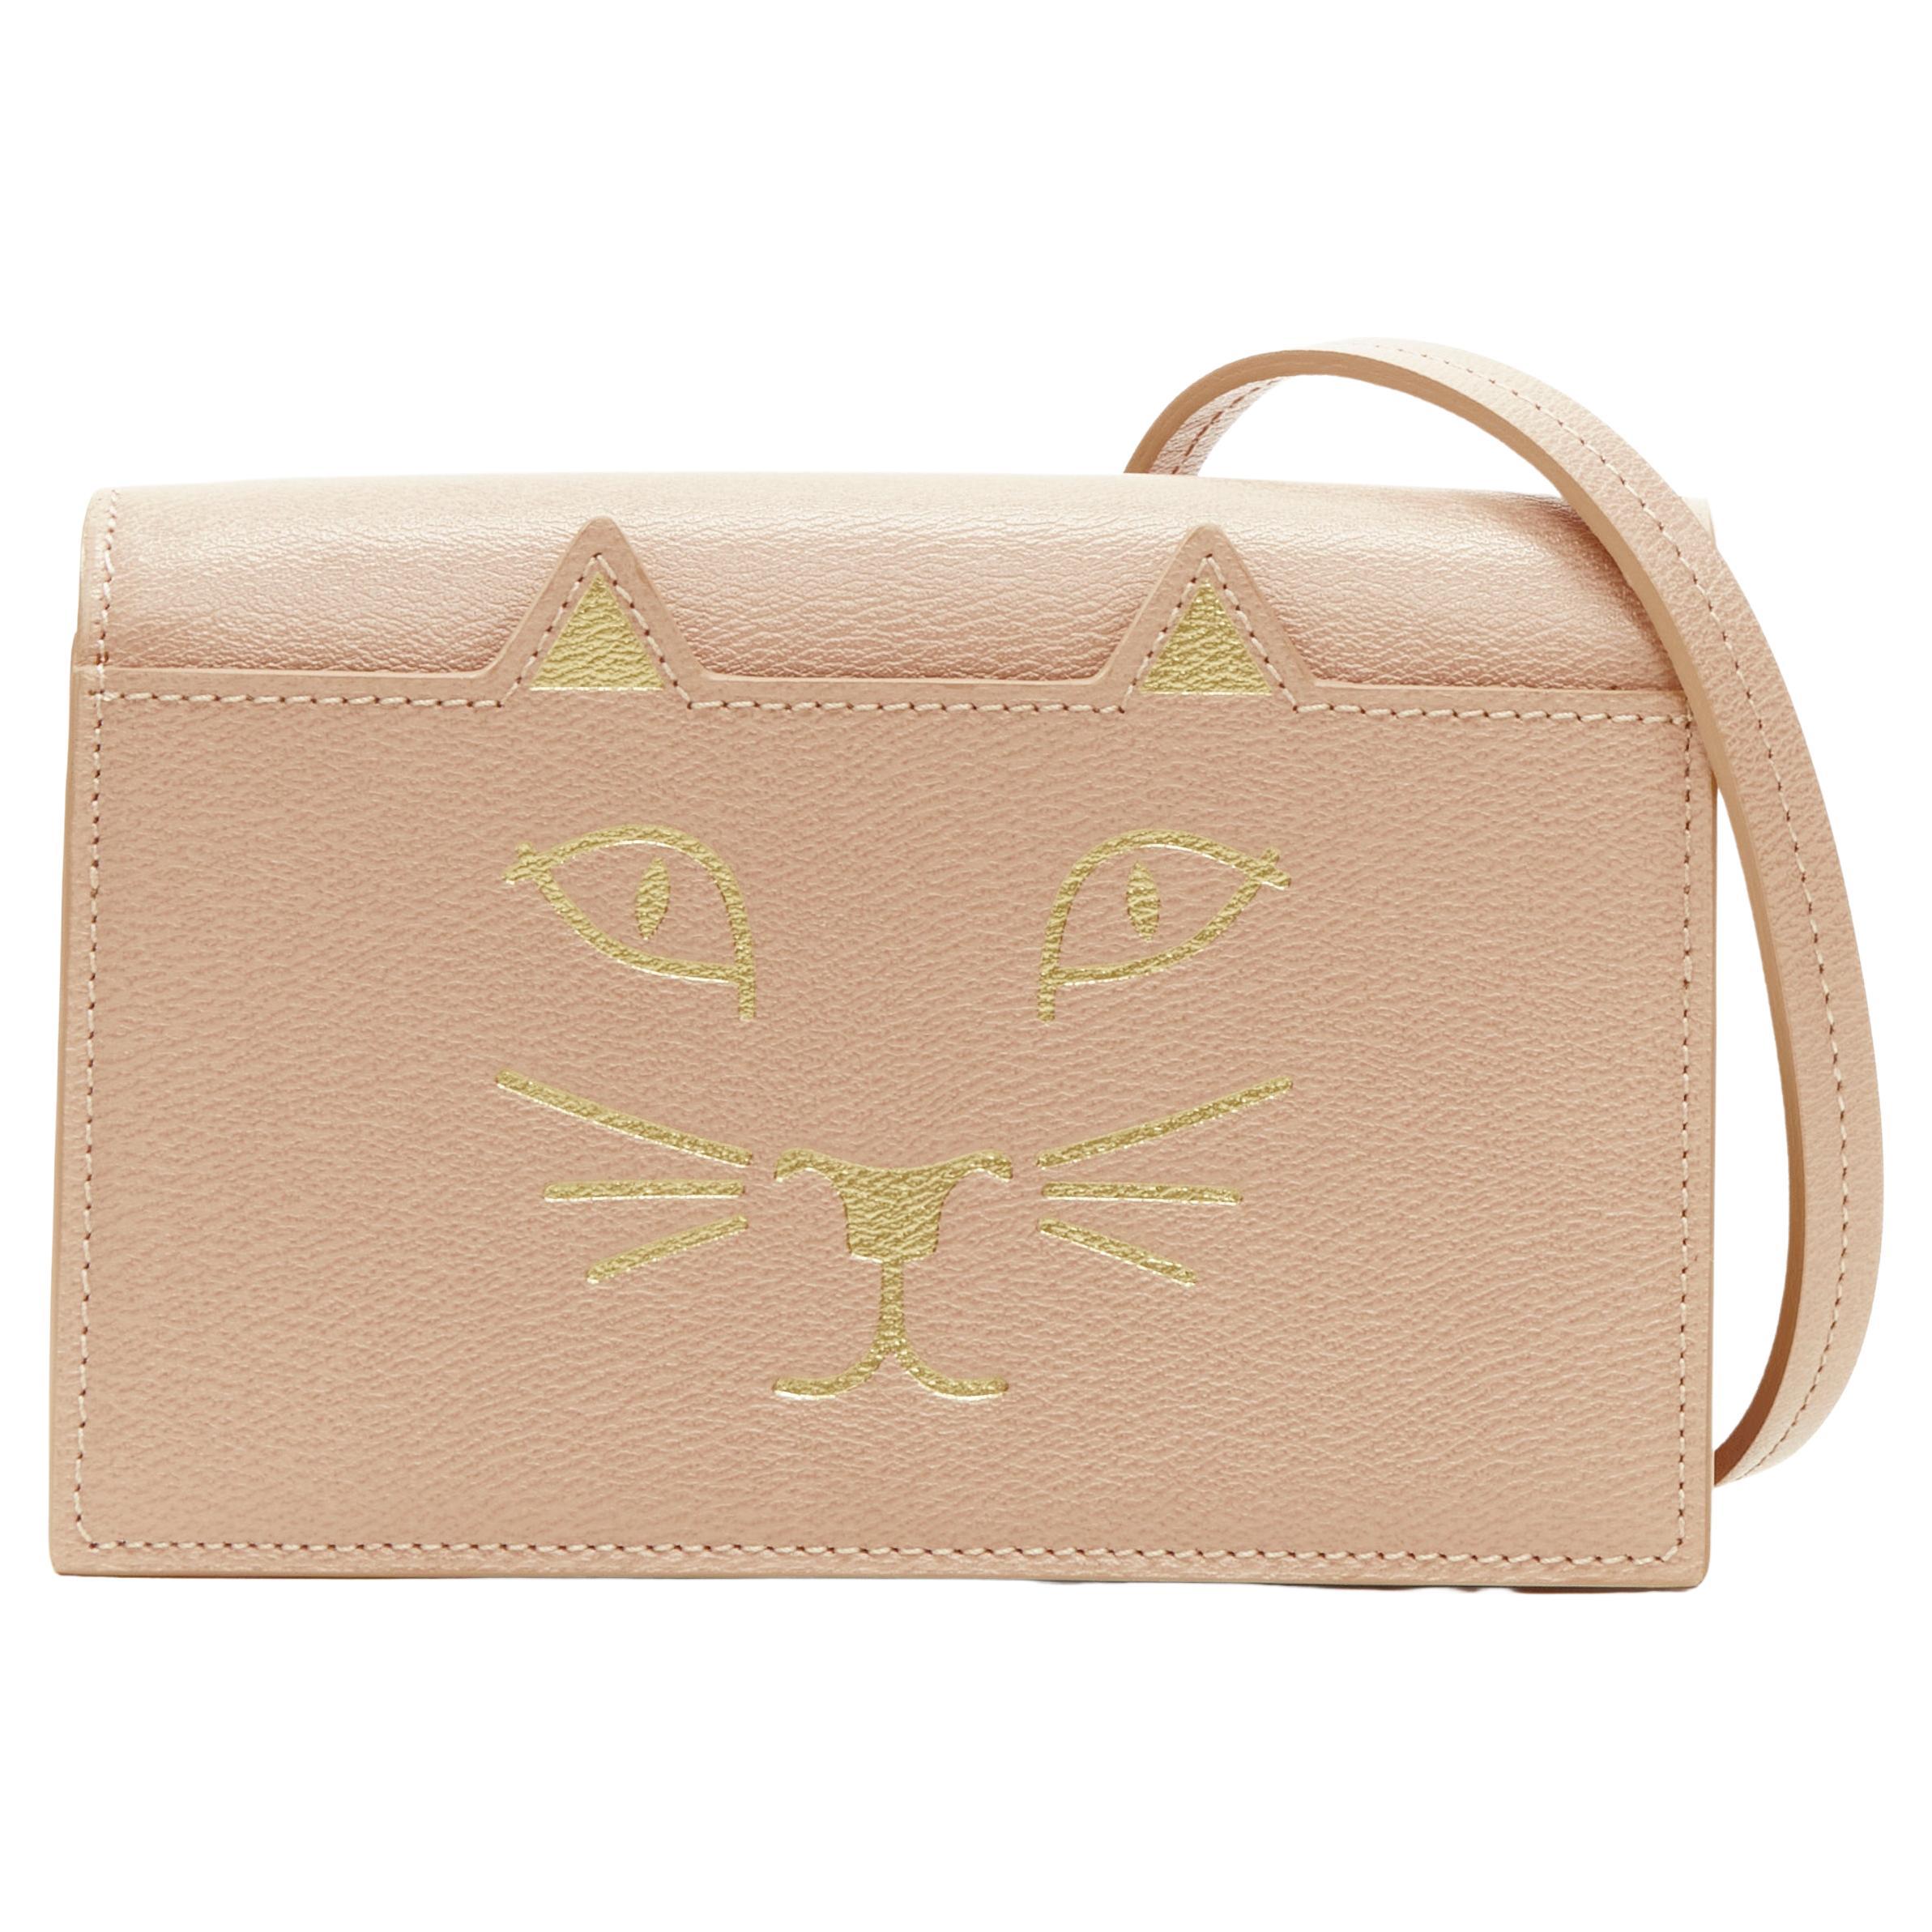 CHARLOTTE OLYMPIA Kitty blush nude gold cat face print leather crossbody bag